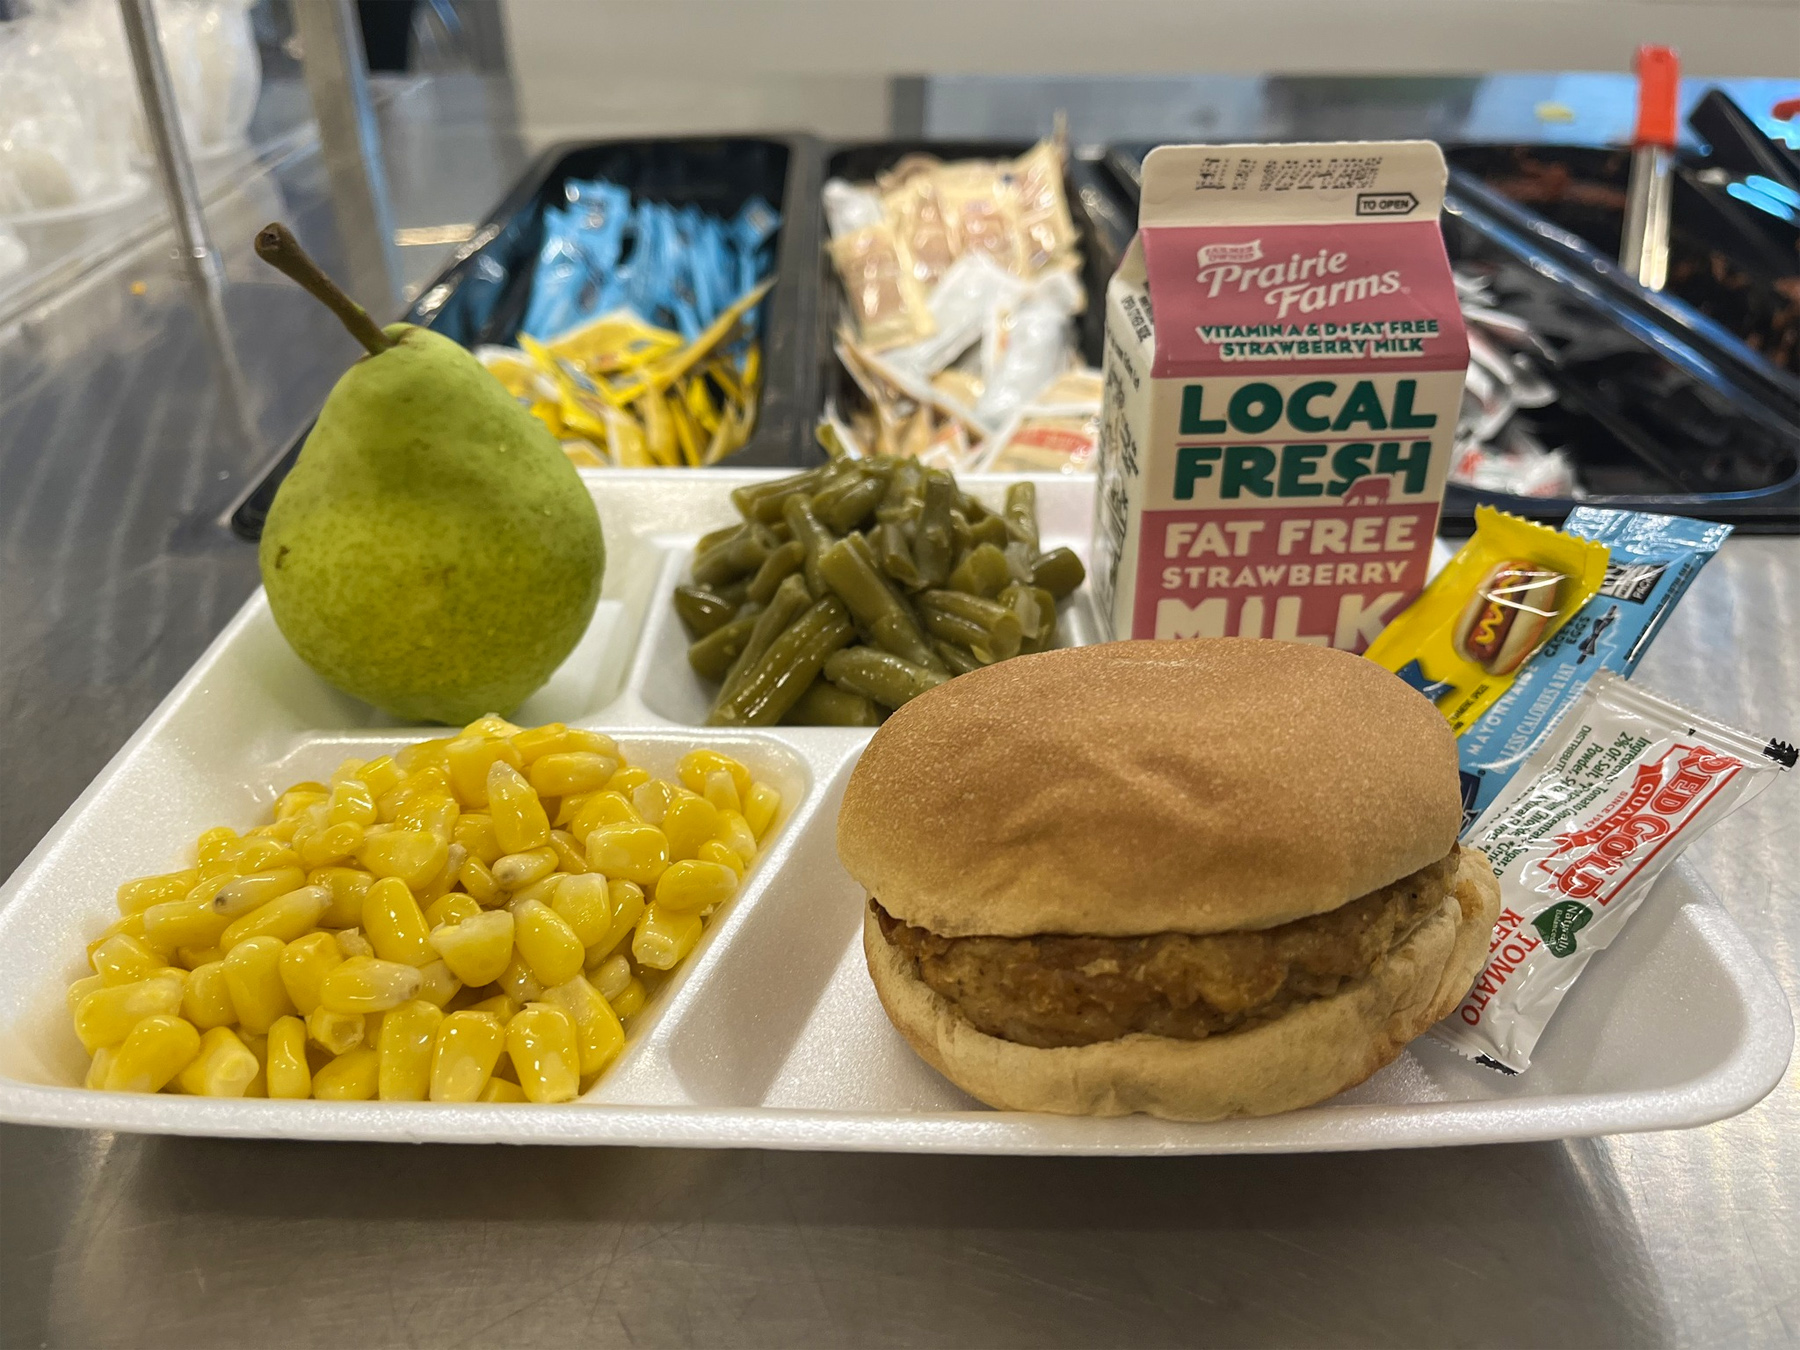 Blue-haired lunch lady wins hearts with her tasty school lunches - wide 4